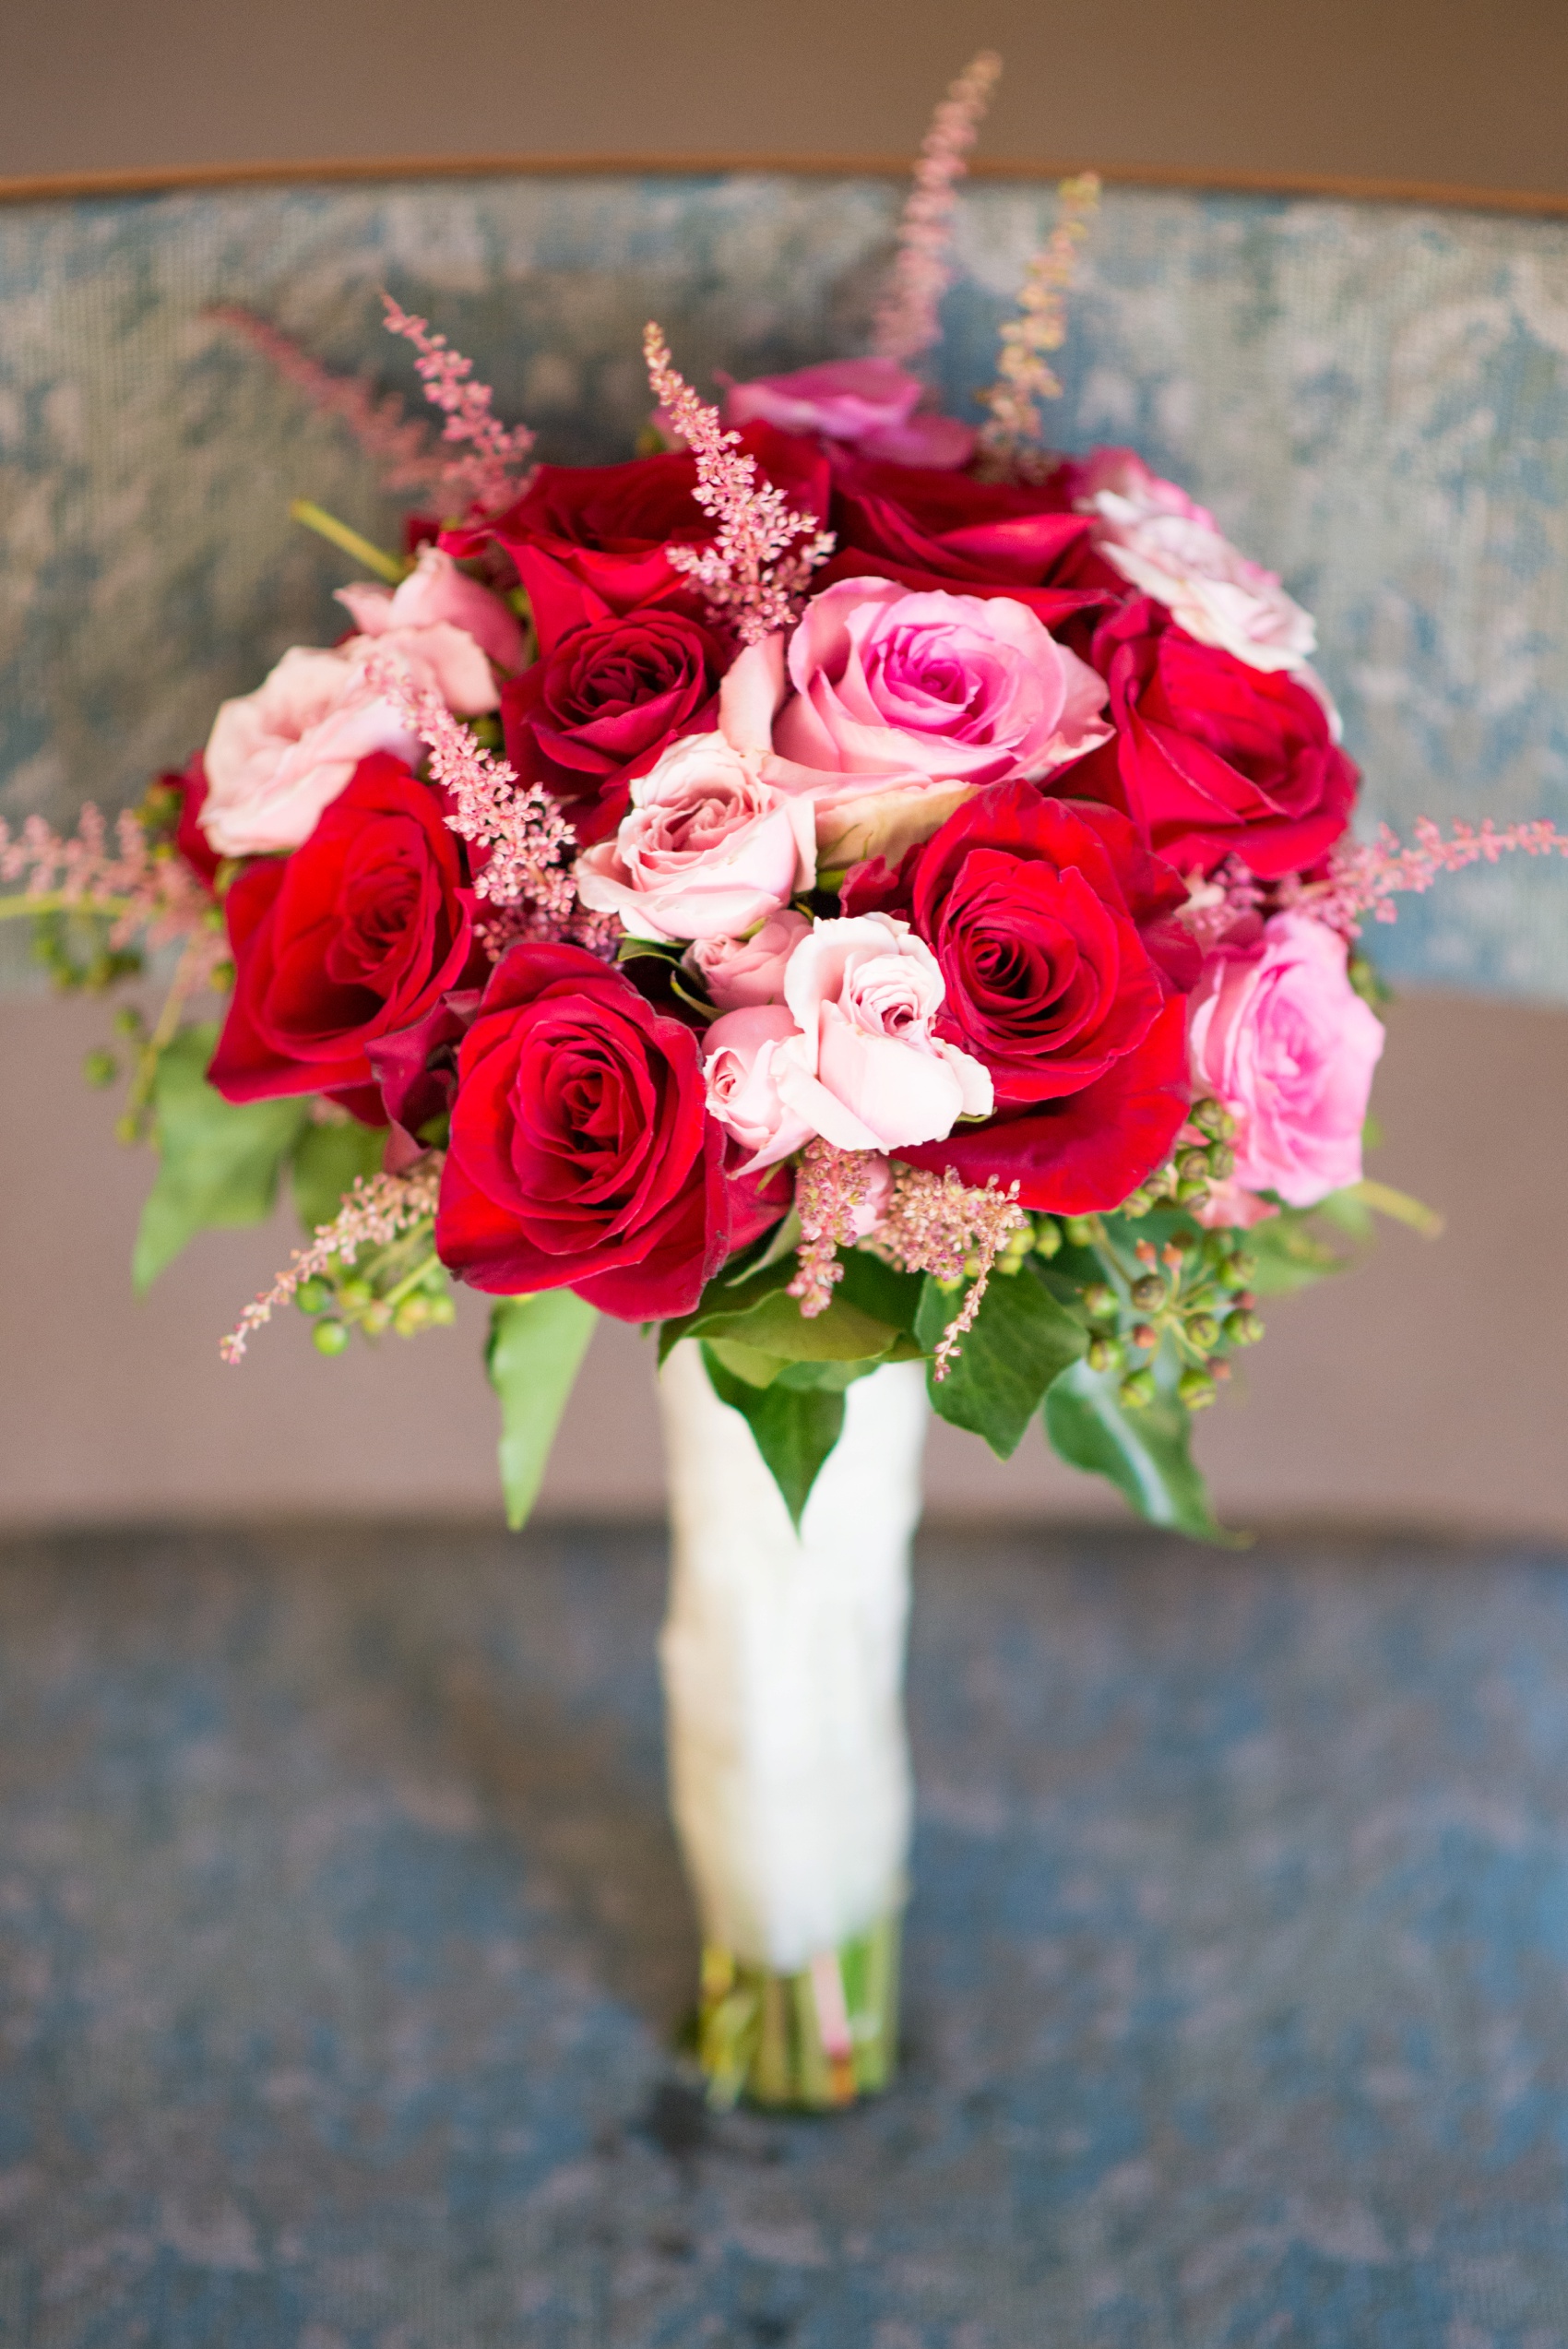 Intimate NJ church ceremony with images by Mikkel Paige Photography. Red and pink rose bouquet for the bride.